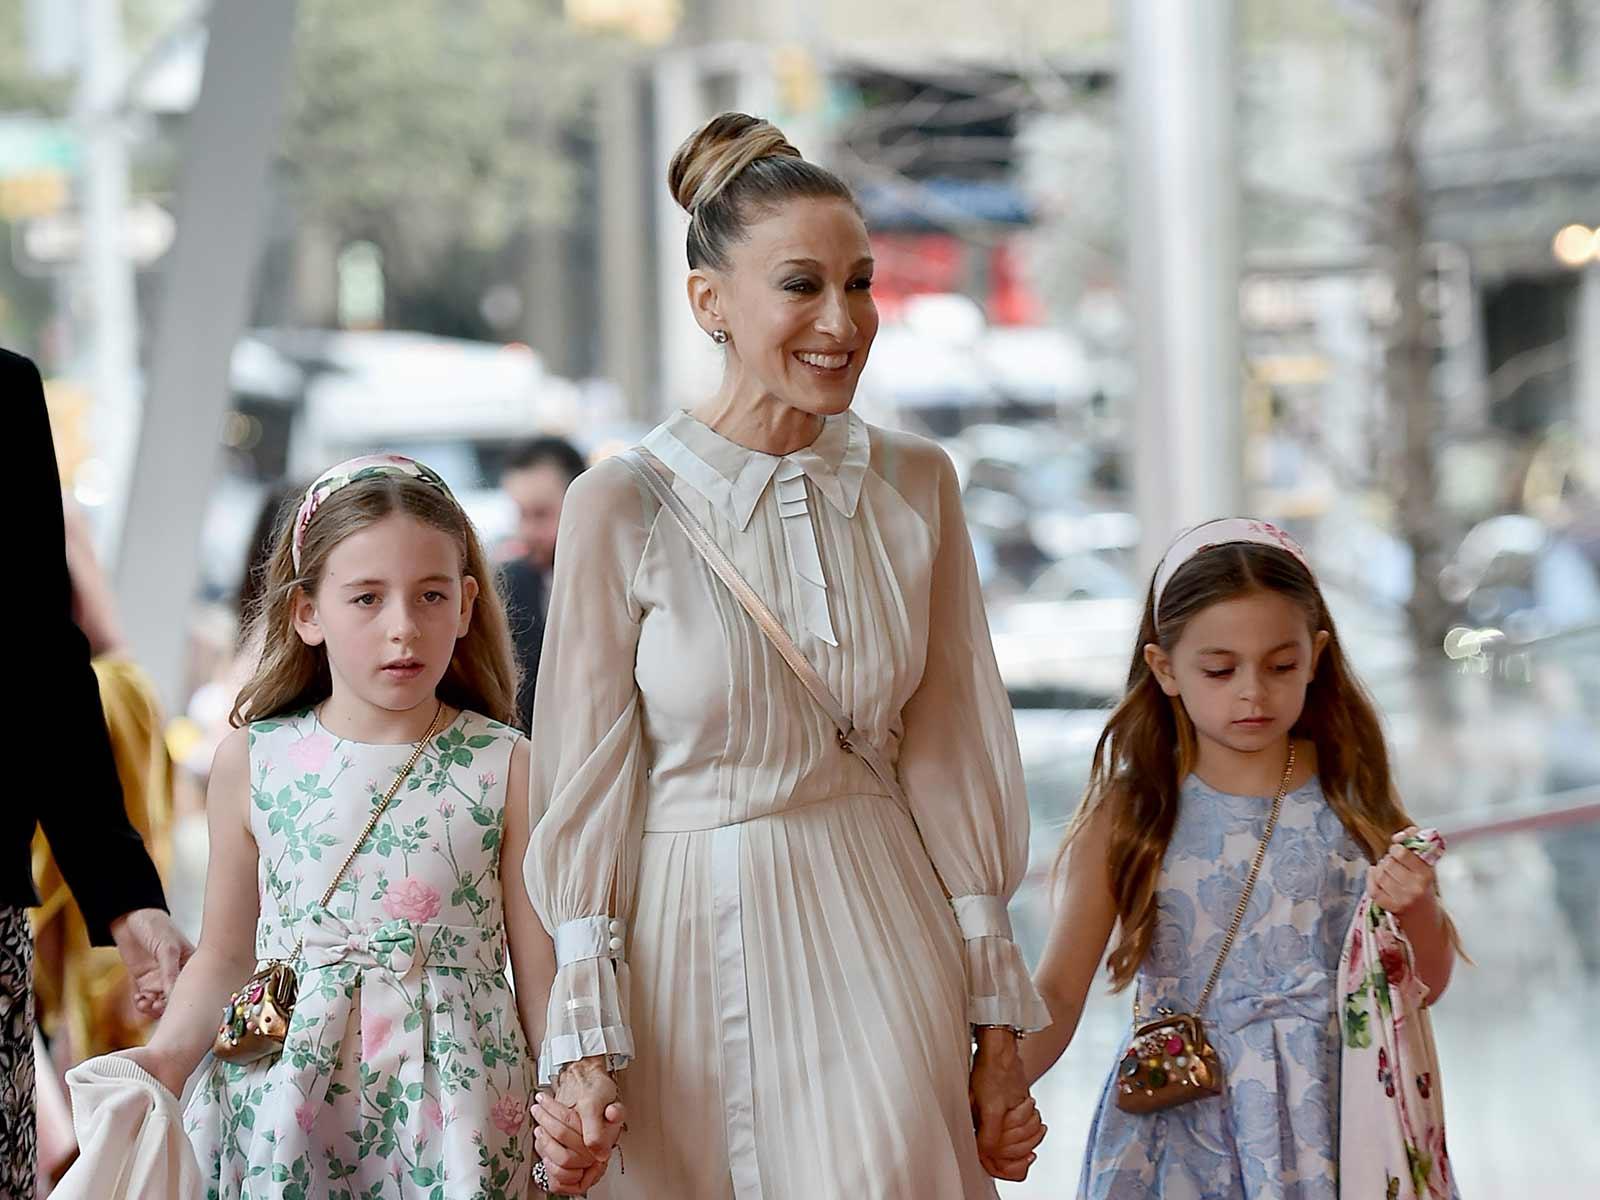 Sarah Jessica Parker Brings Her Twin Daughters as Her Dates to the Ballet